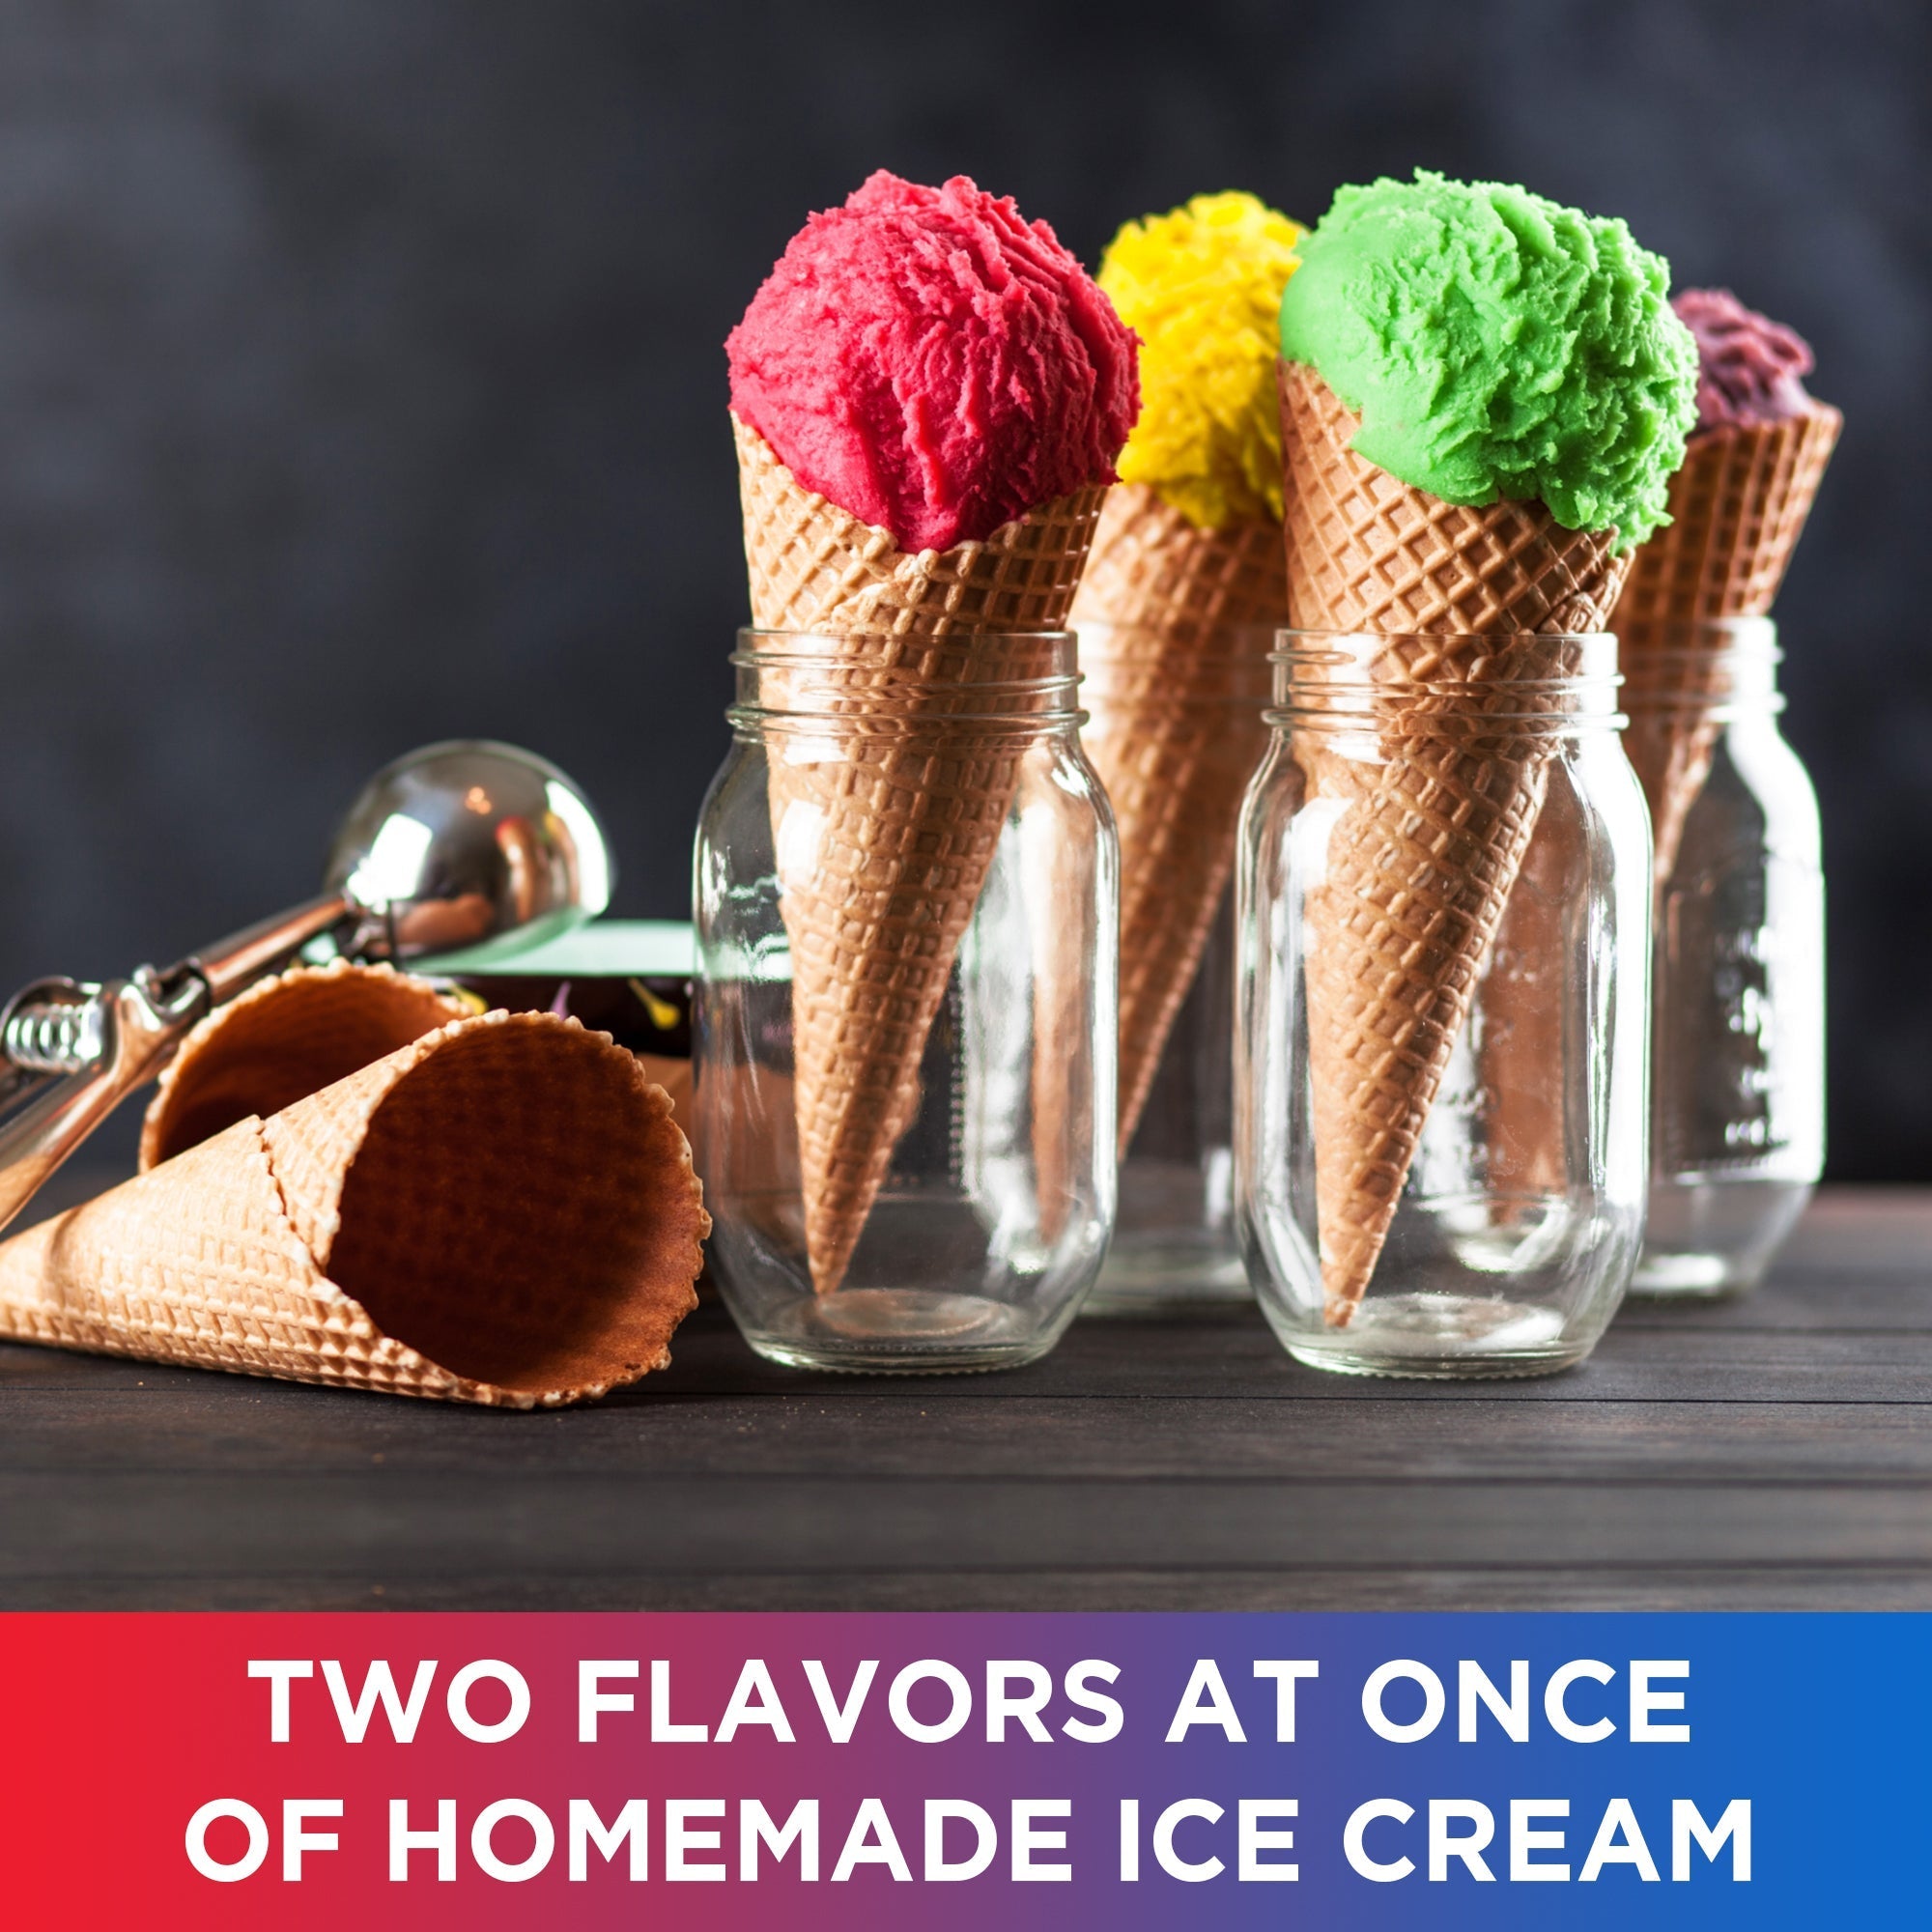 Lifestyle image of scoops of pink, yellow, and green ice cream in waffle cones standing in clear mason jars on a dark gray table. Text below reads, "Two flavors at once of homemade ice cream"